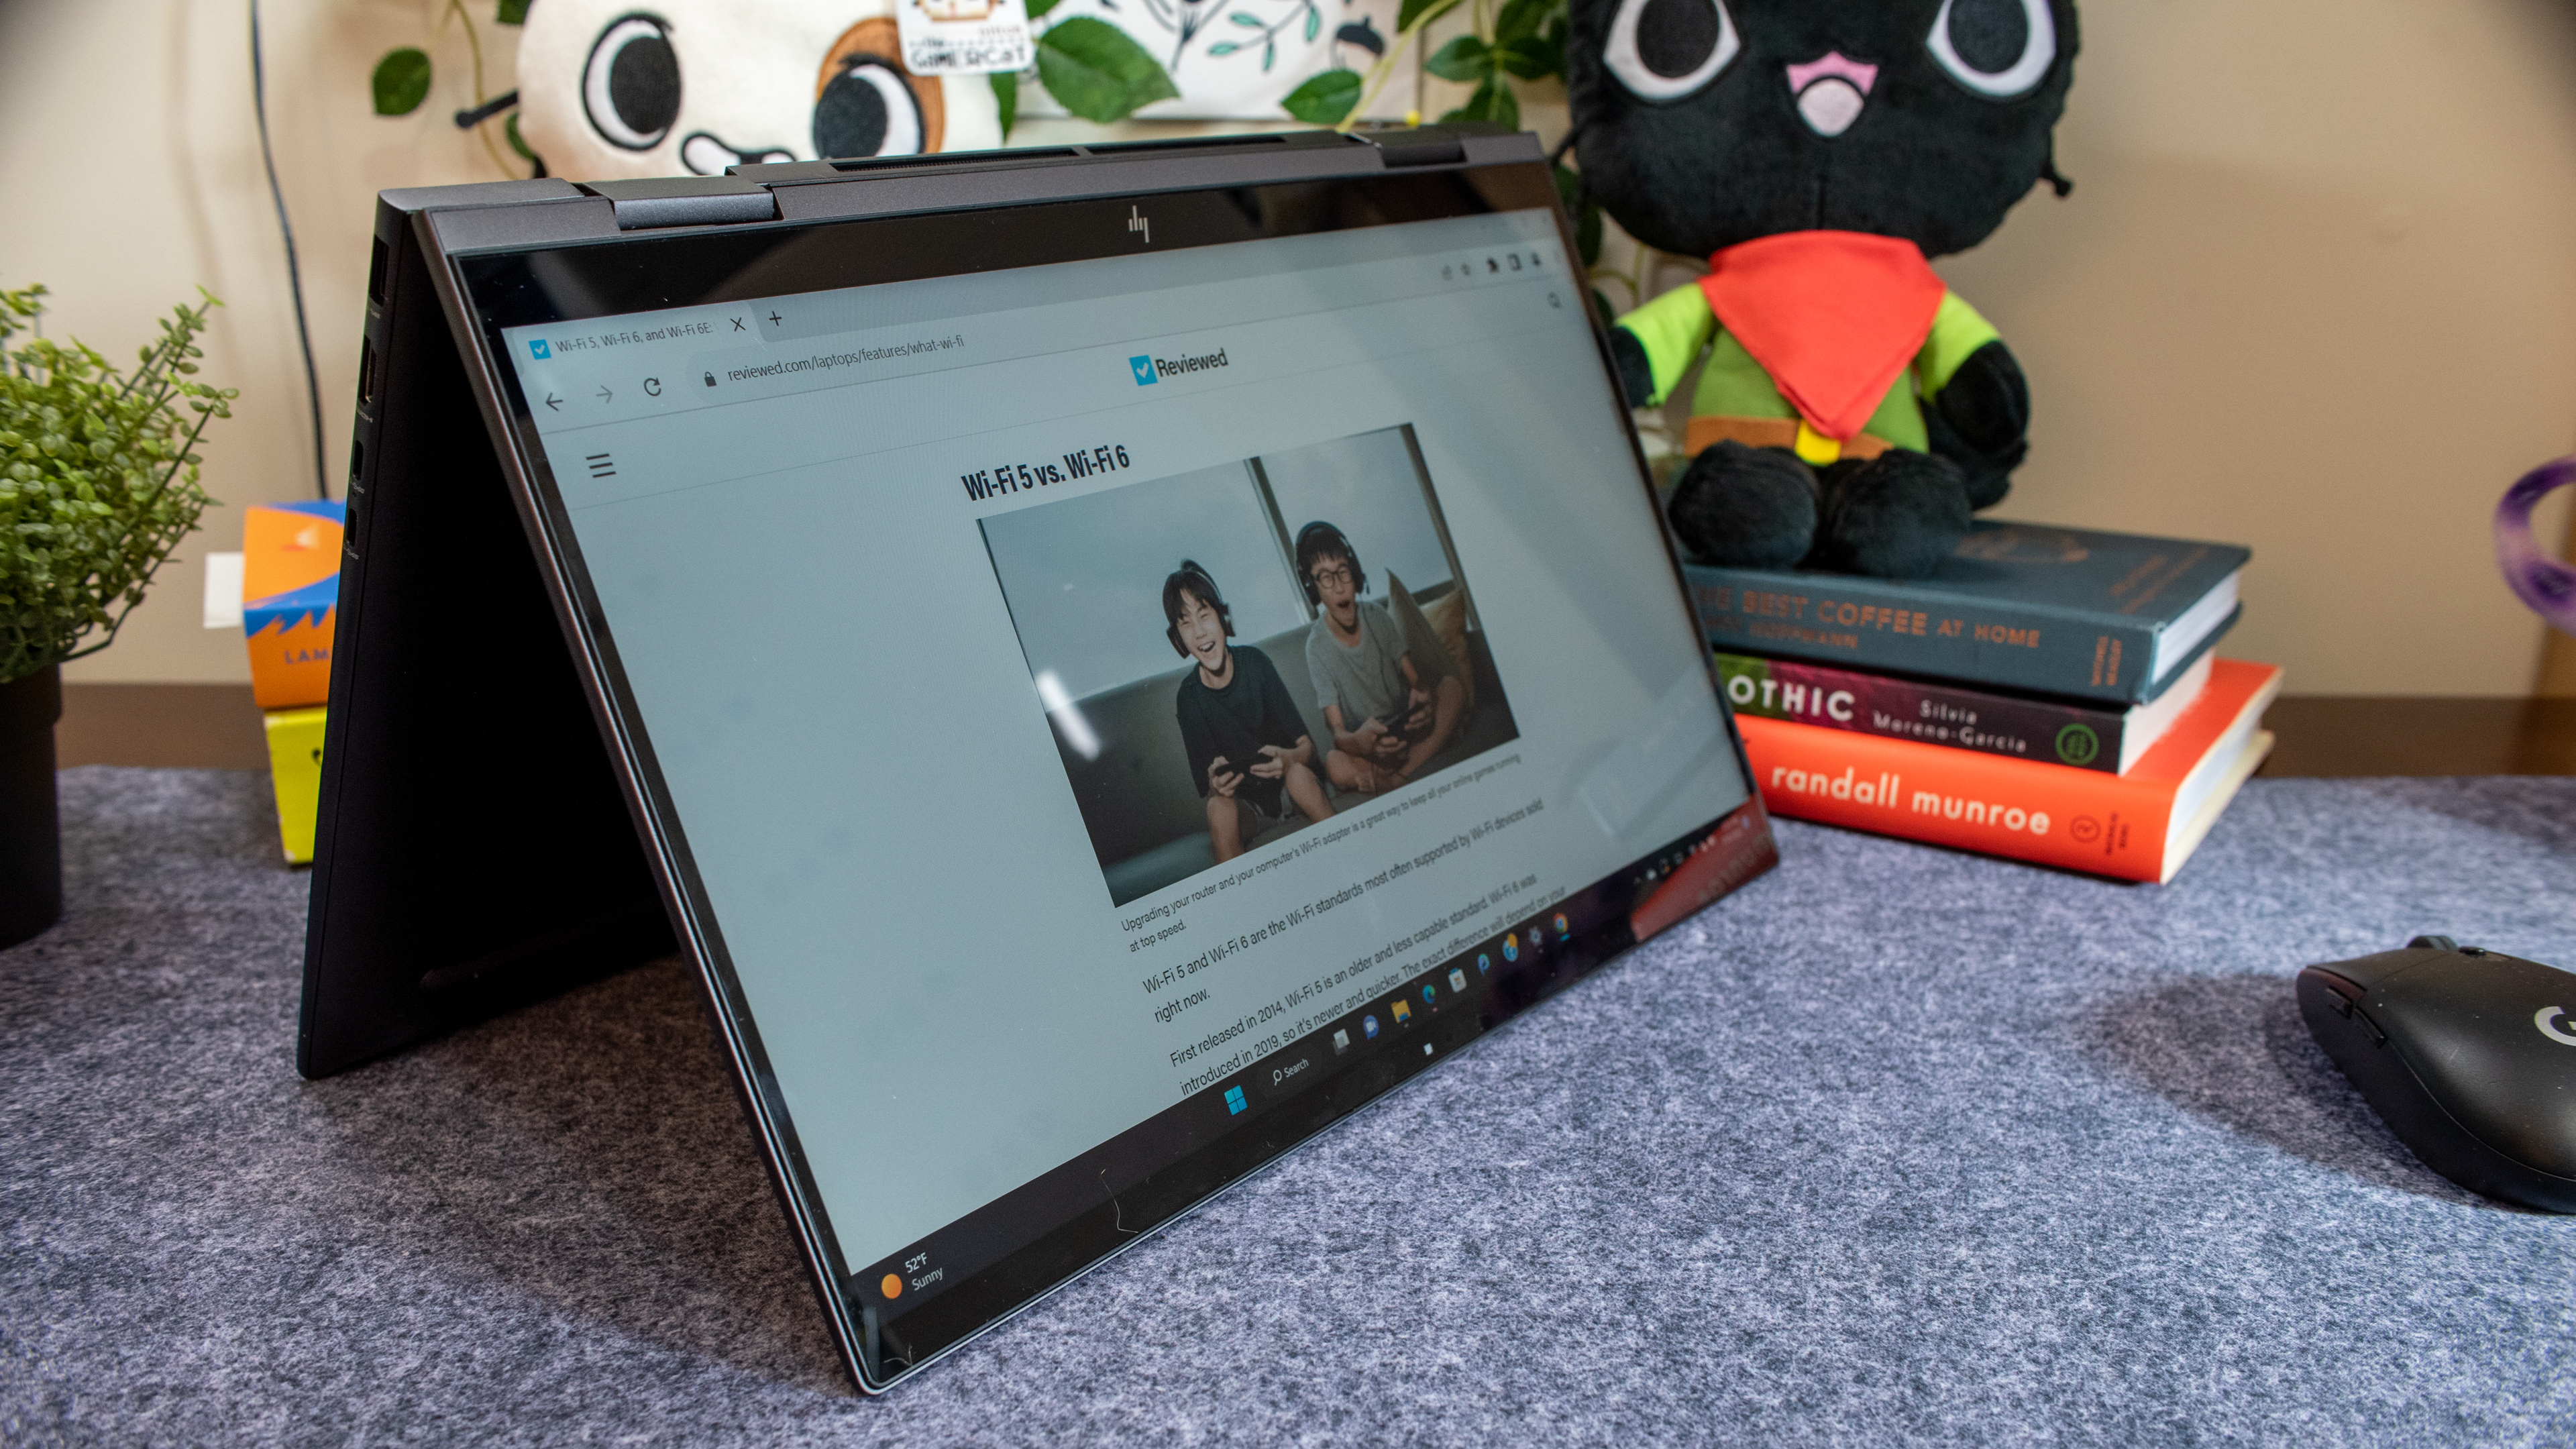 The HP Envy x360 folded into tablet mode.